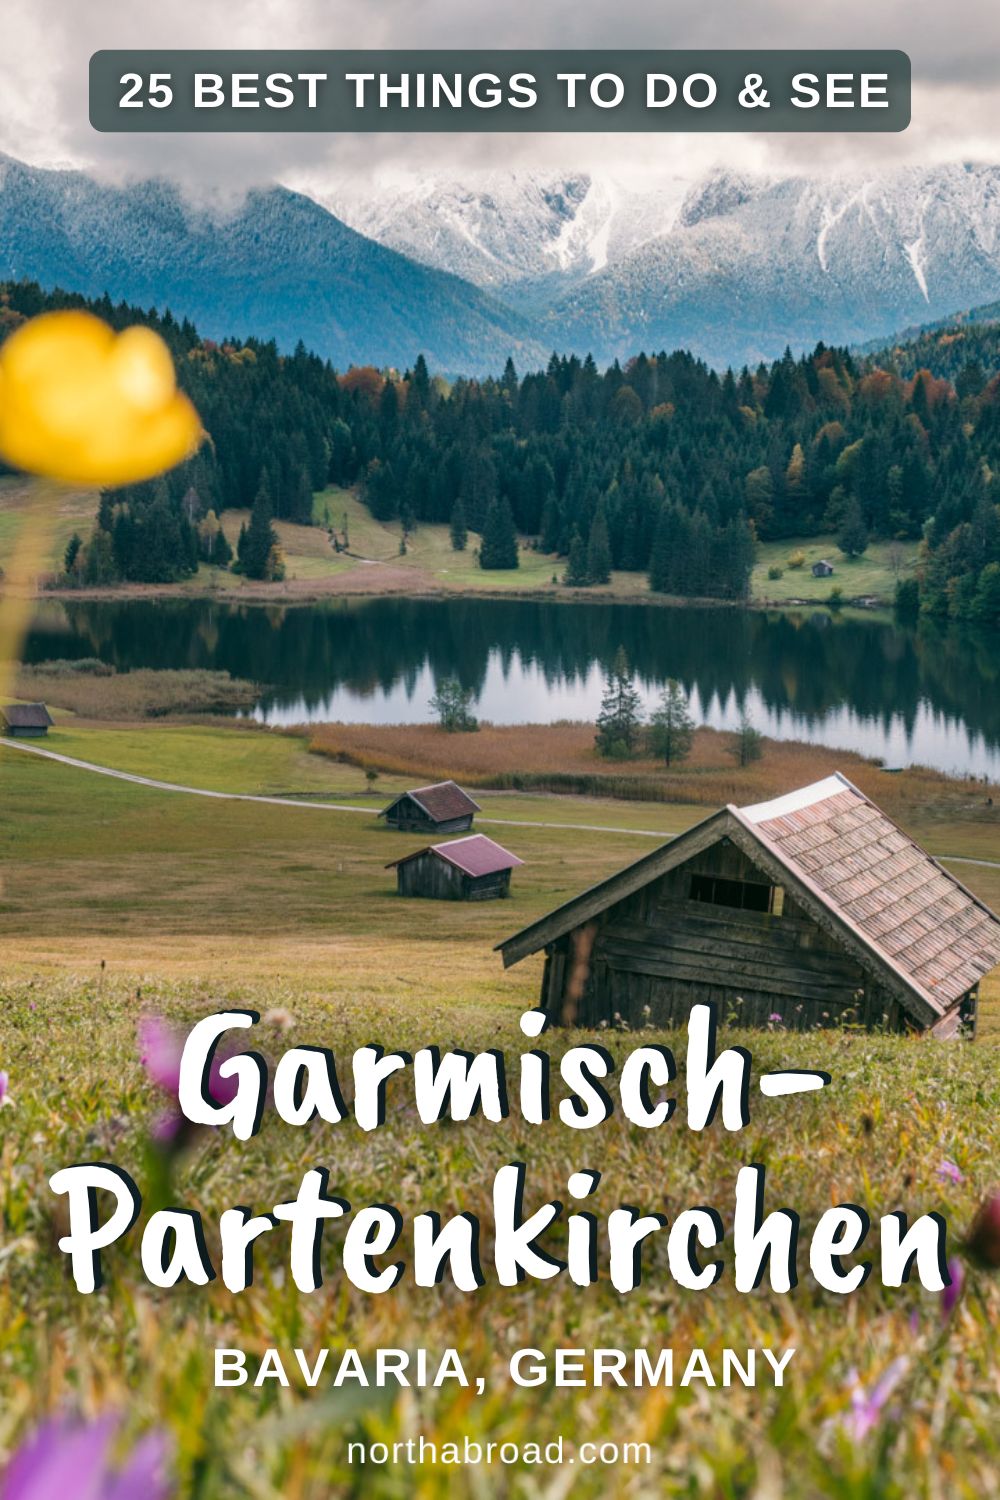 A Complete Travel Guide to Garmisch-Partenkirchen: 25 Best Things To Do & See